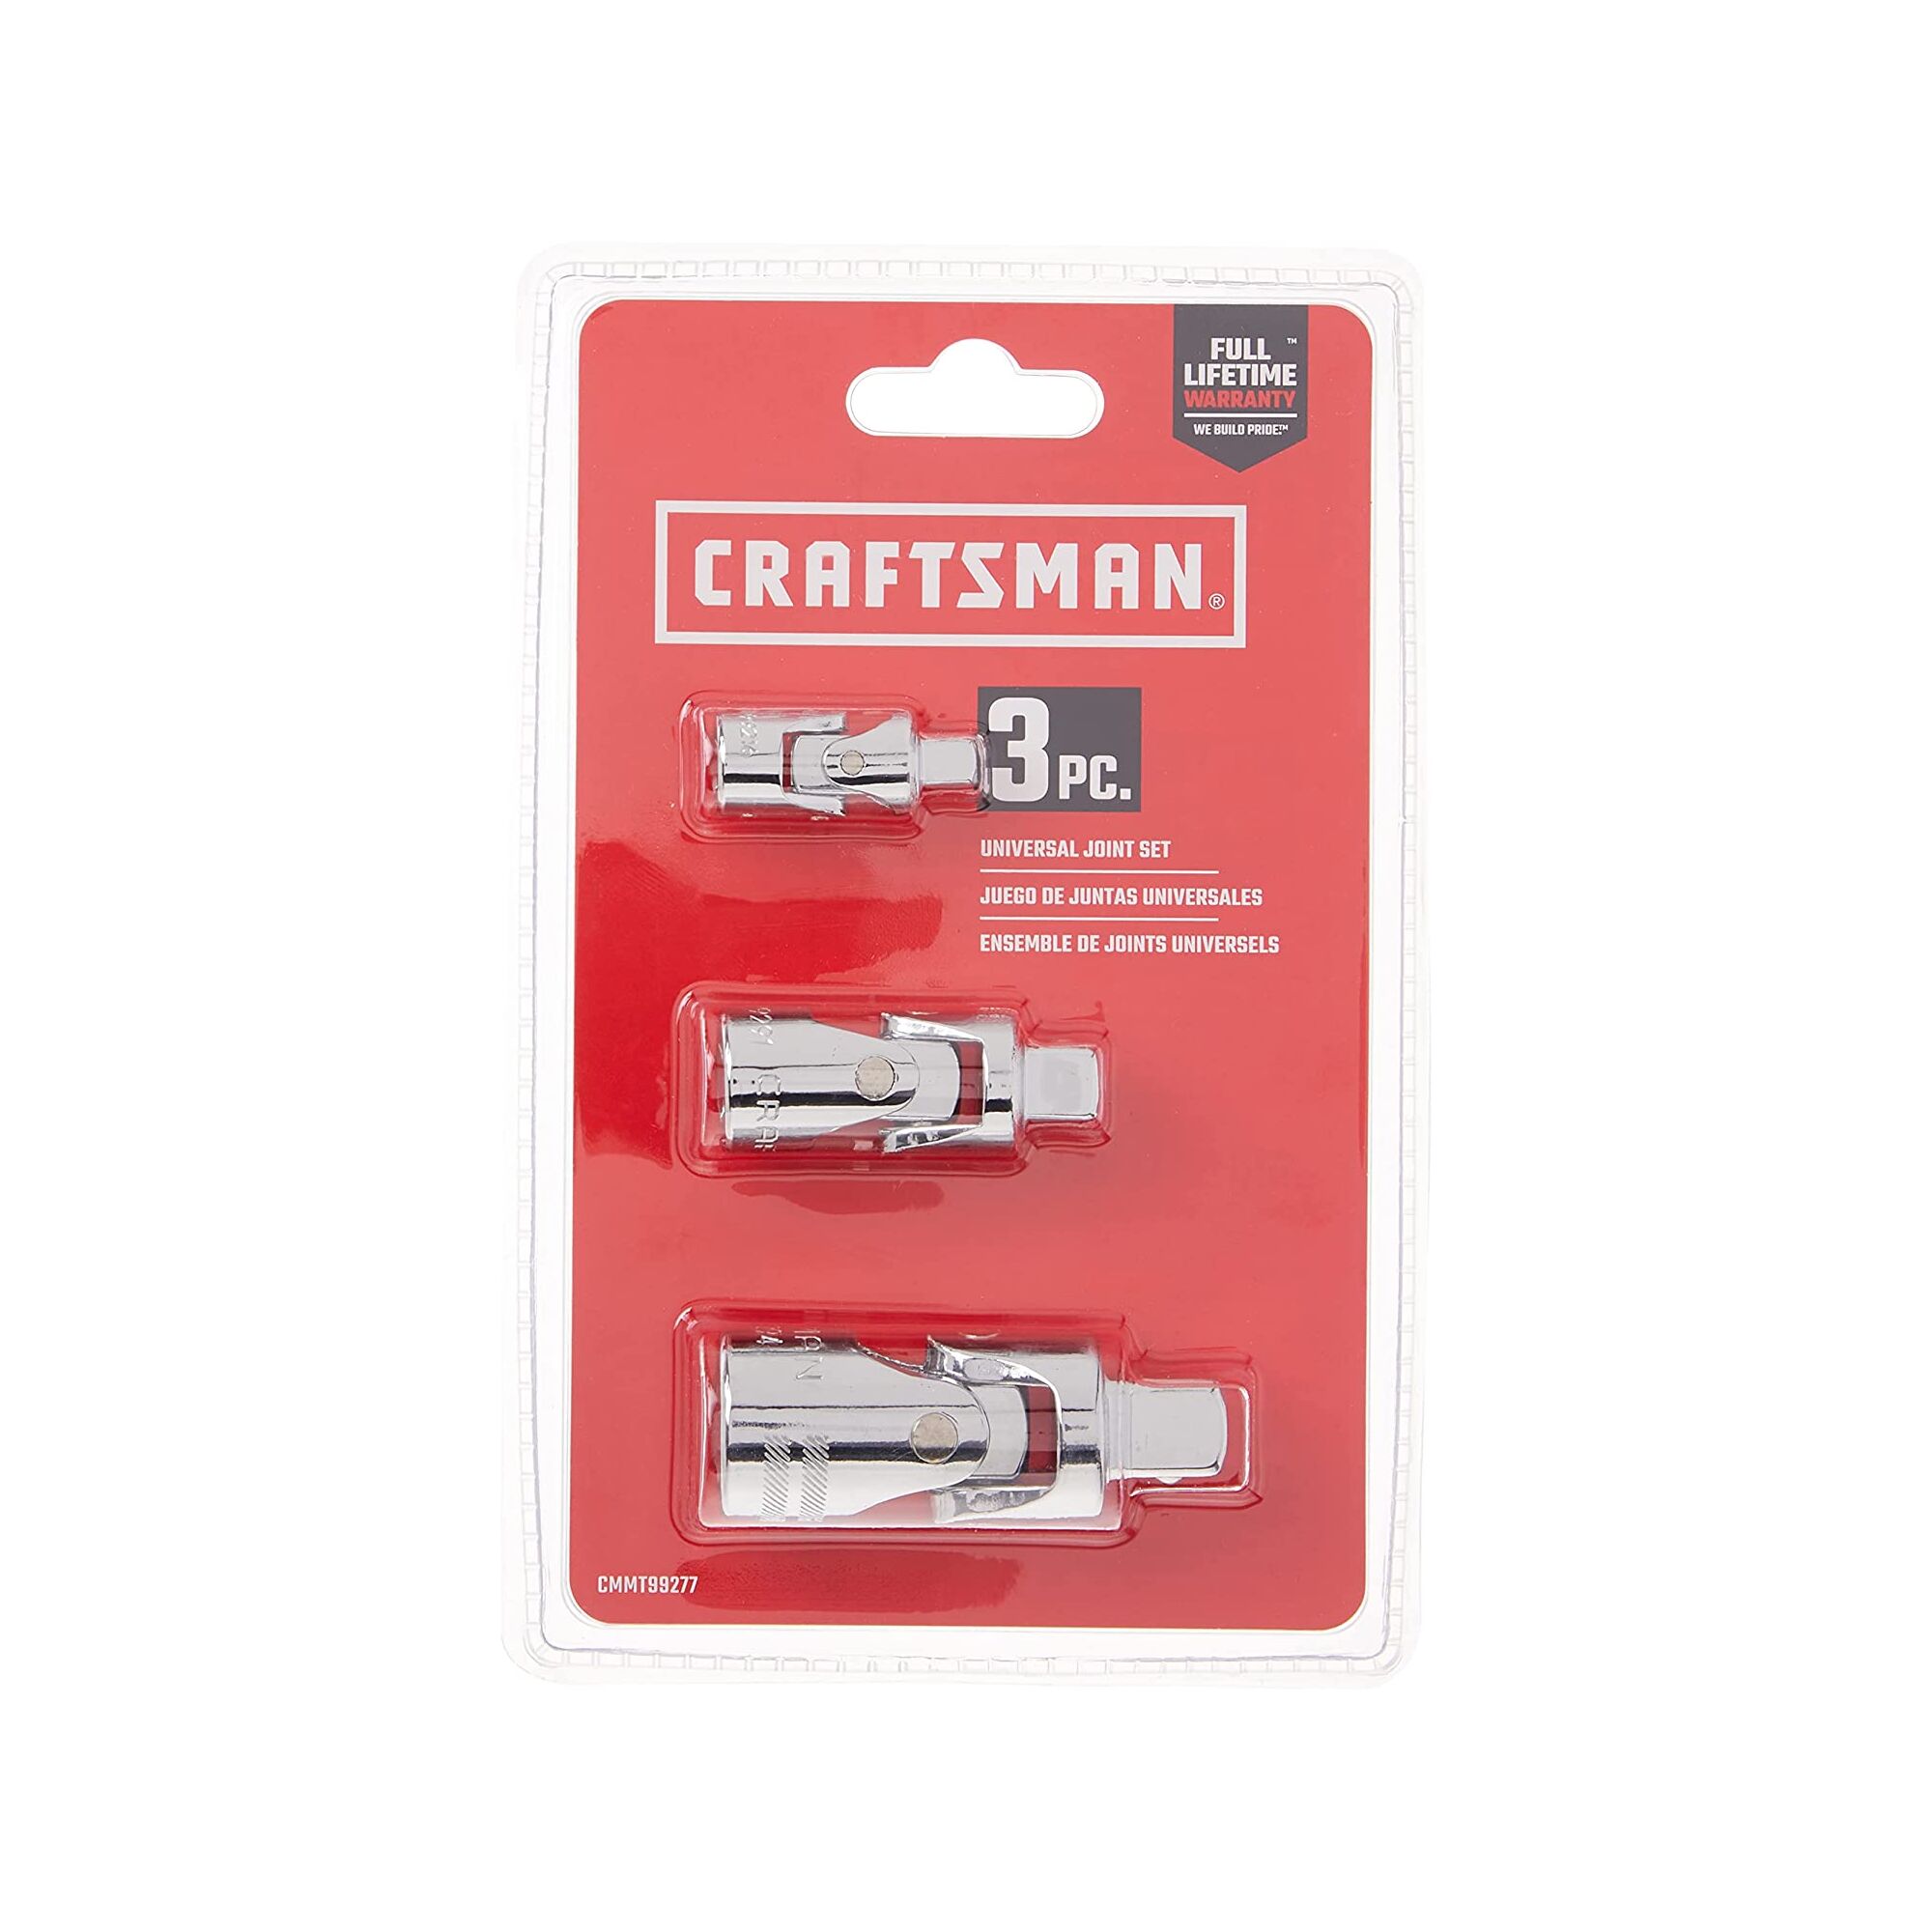 View of CRAFTSMAN Sockets: Universal Joint packaging